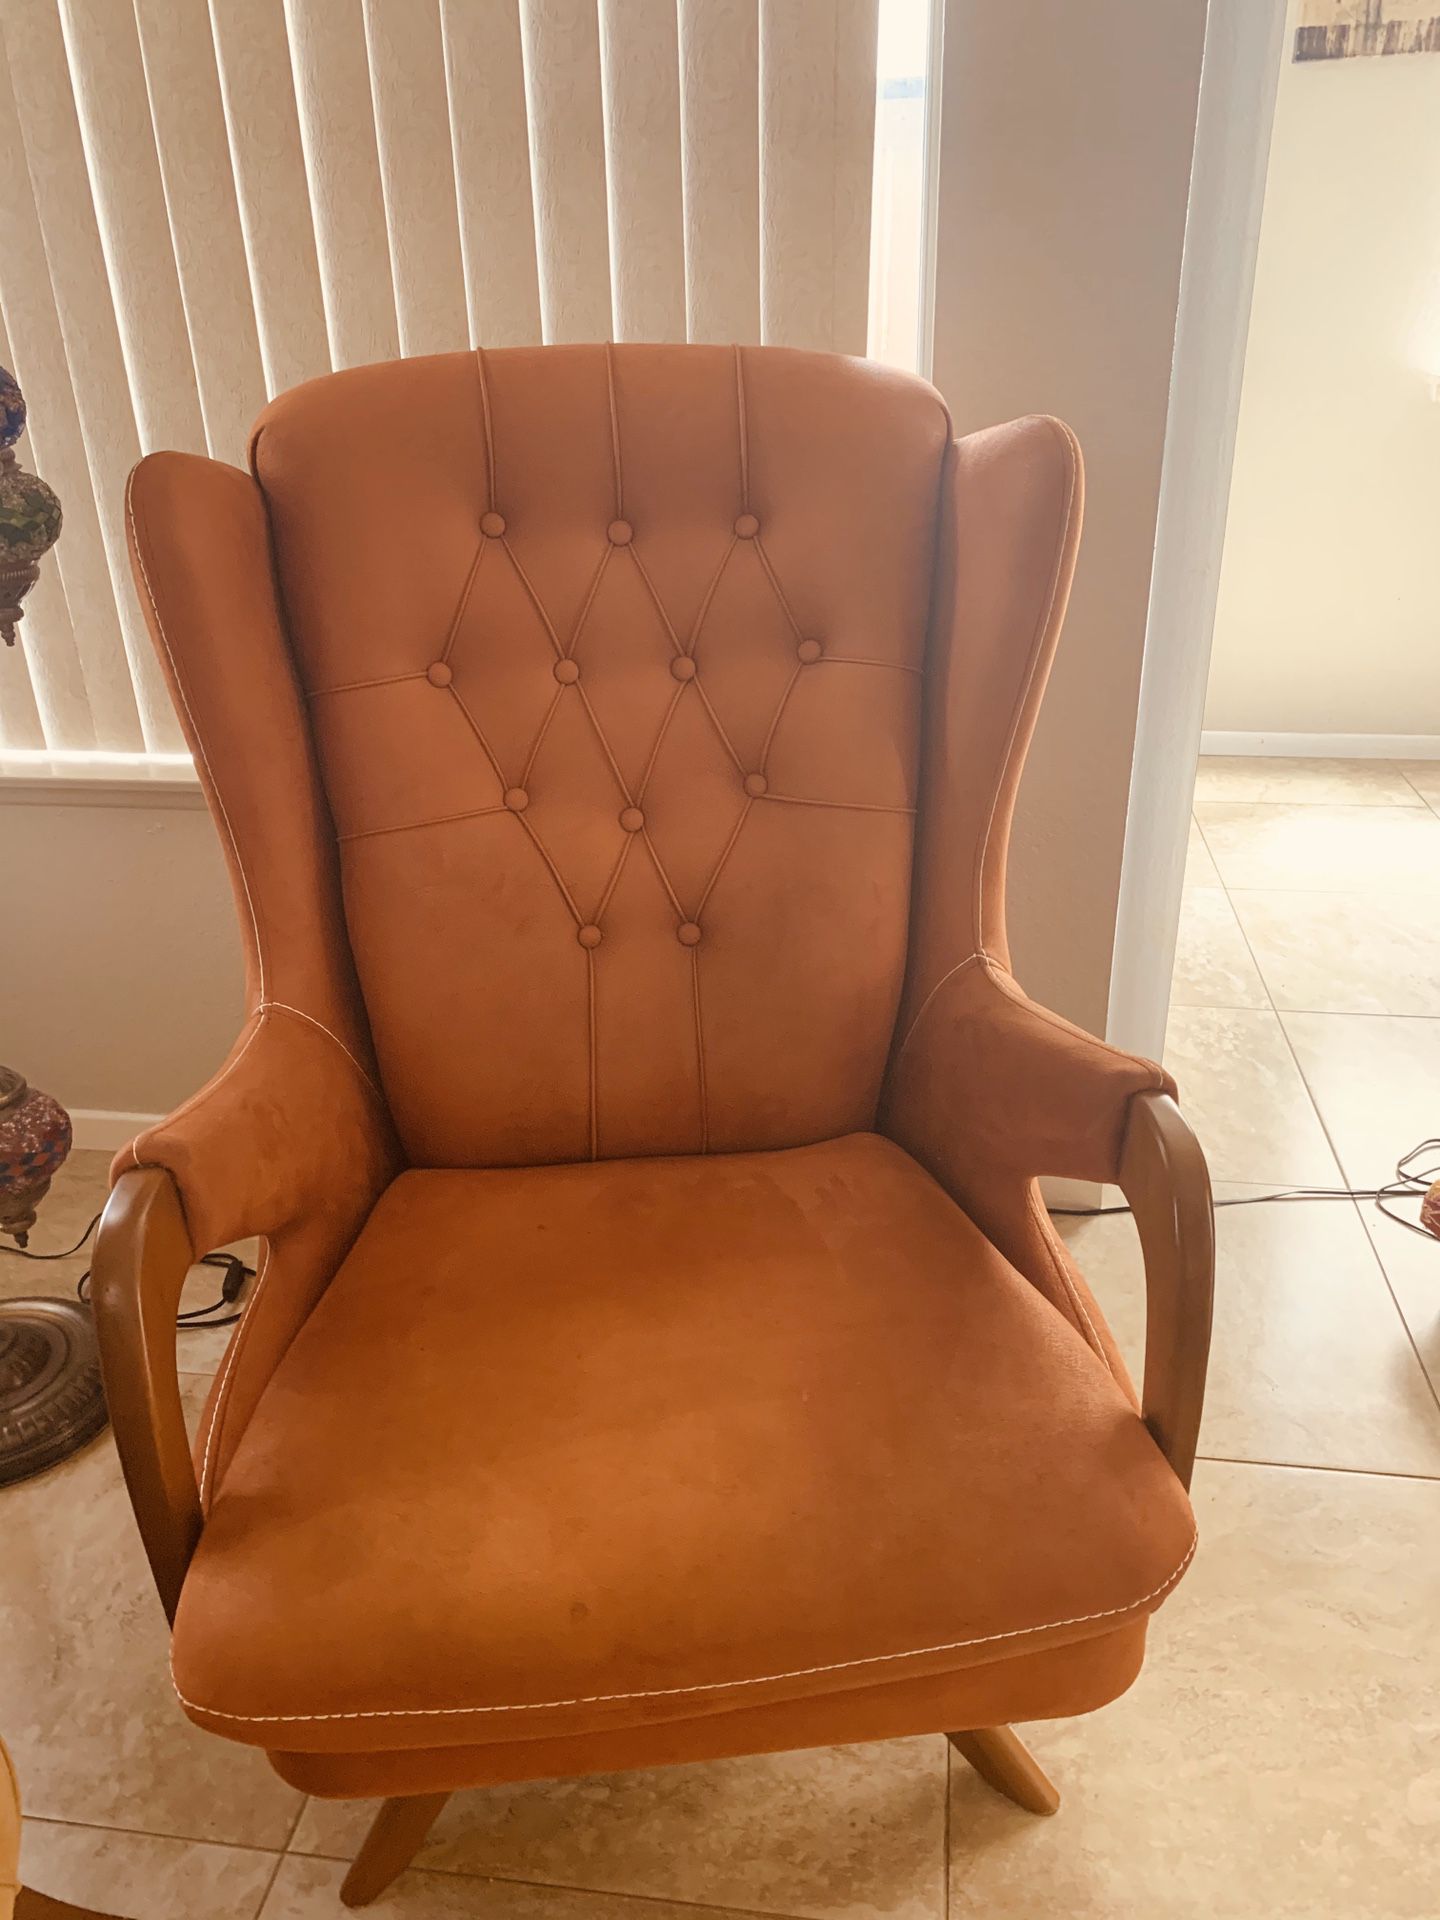 *NEW* OFFICE CHAIR, DESK CHAIR, LIVING ROOM SINGLE CHAIR